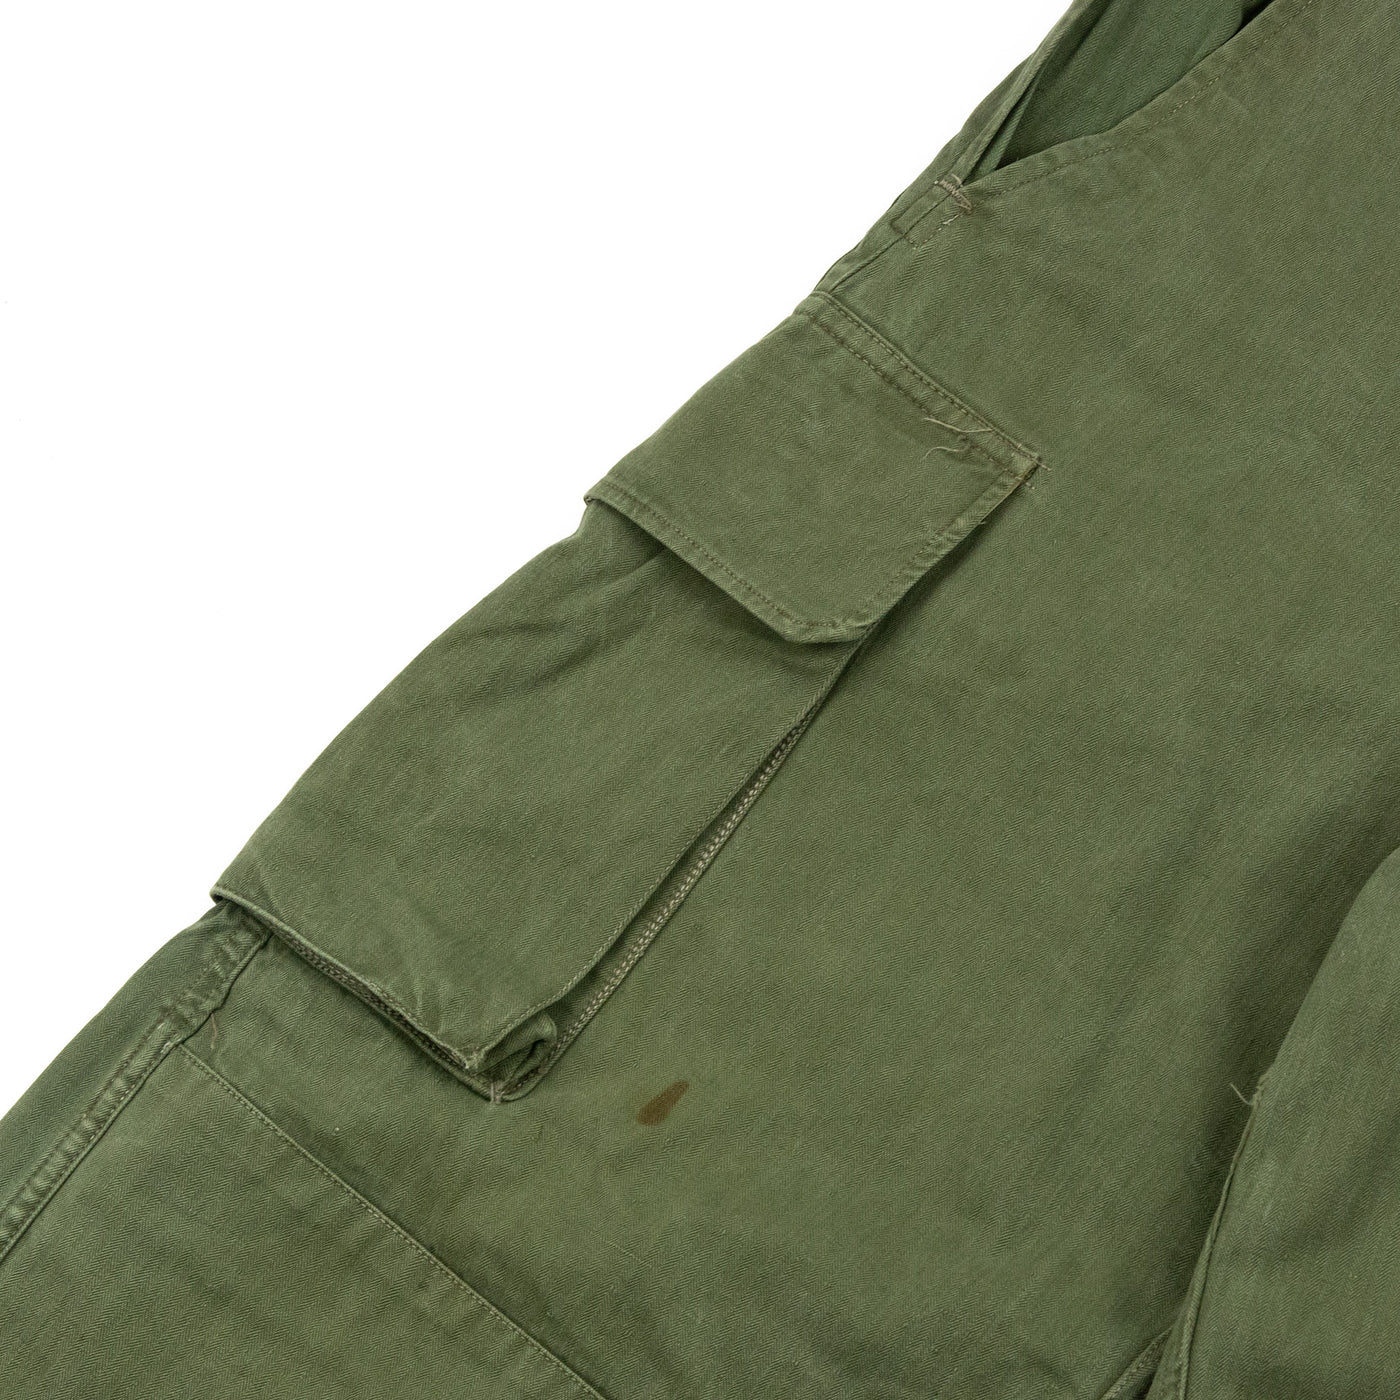 Vintage 1950s French Army M47 HBT Military Cargo Trousers - 30 Pocket